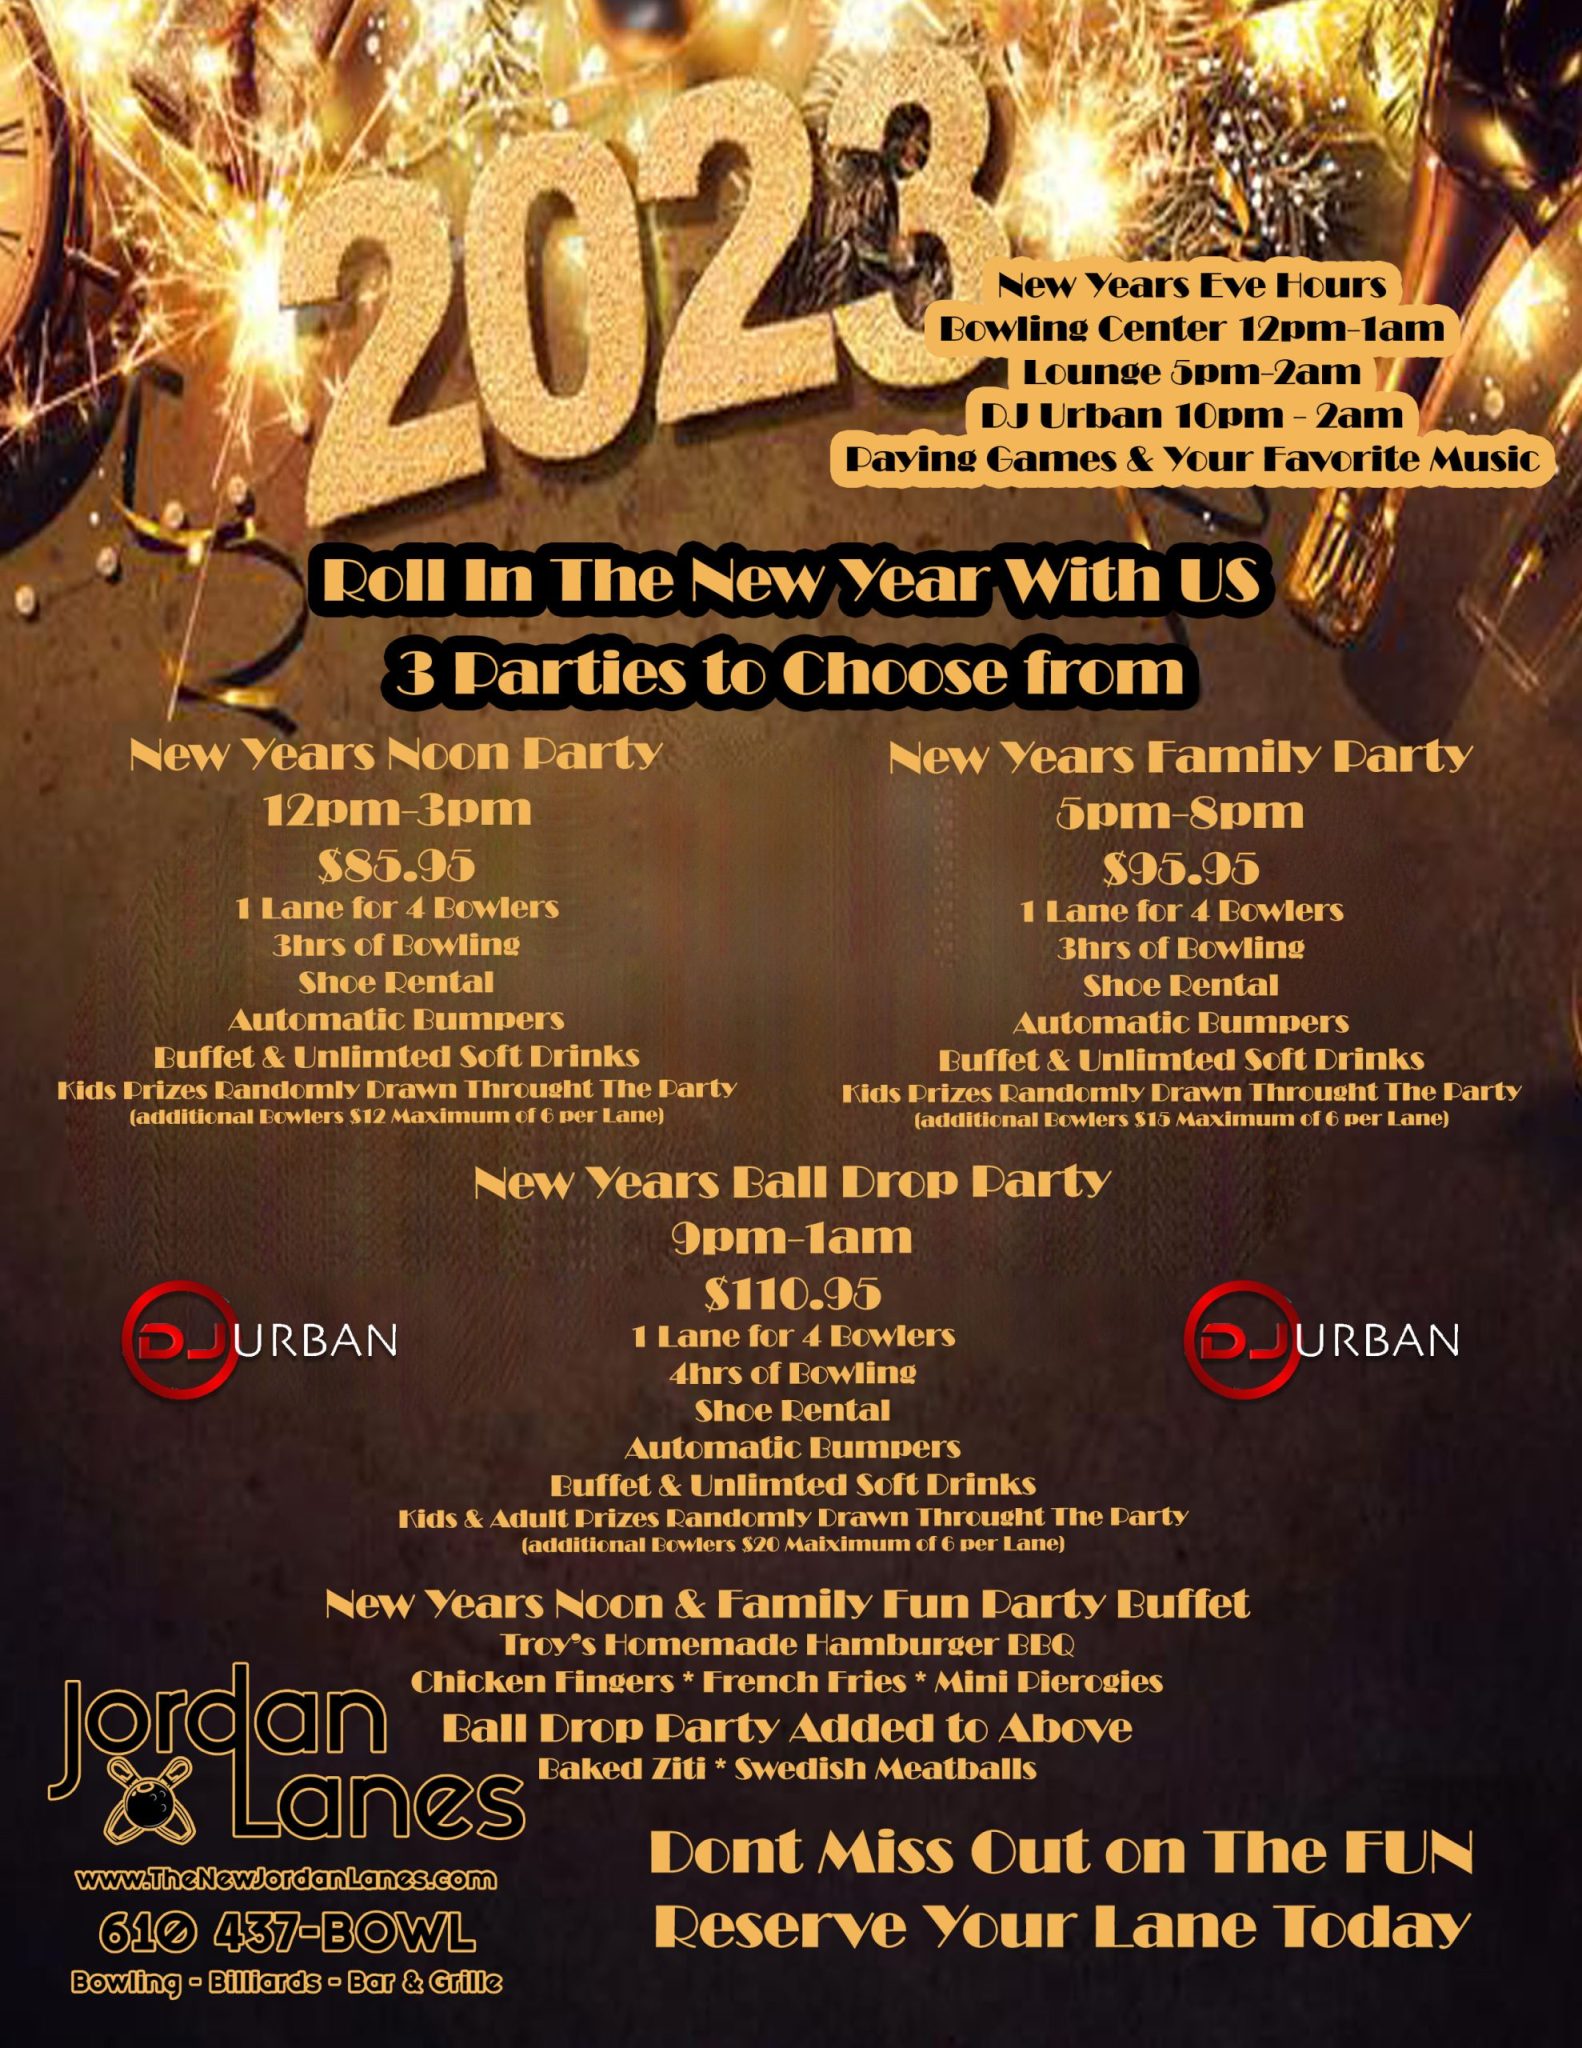 New Years Ball Drop Party @ The New Jordan Lanes